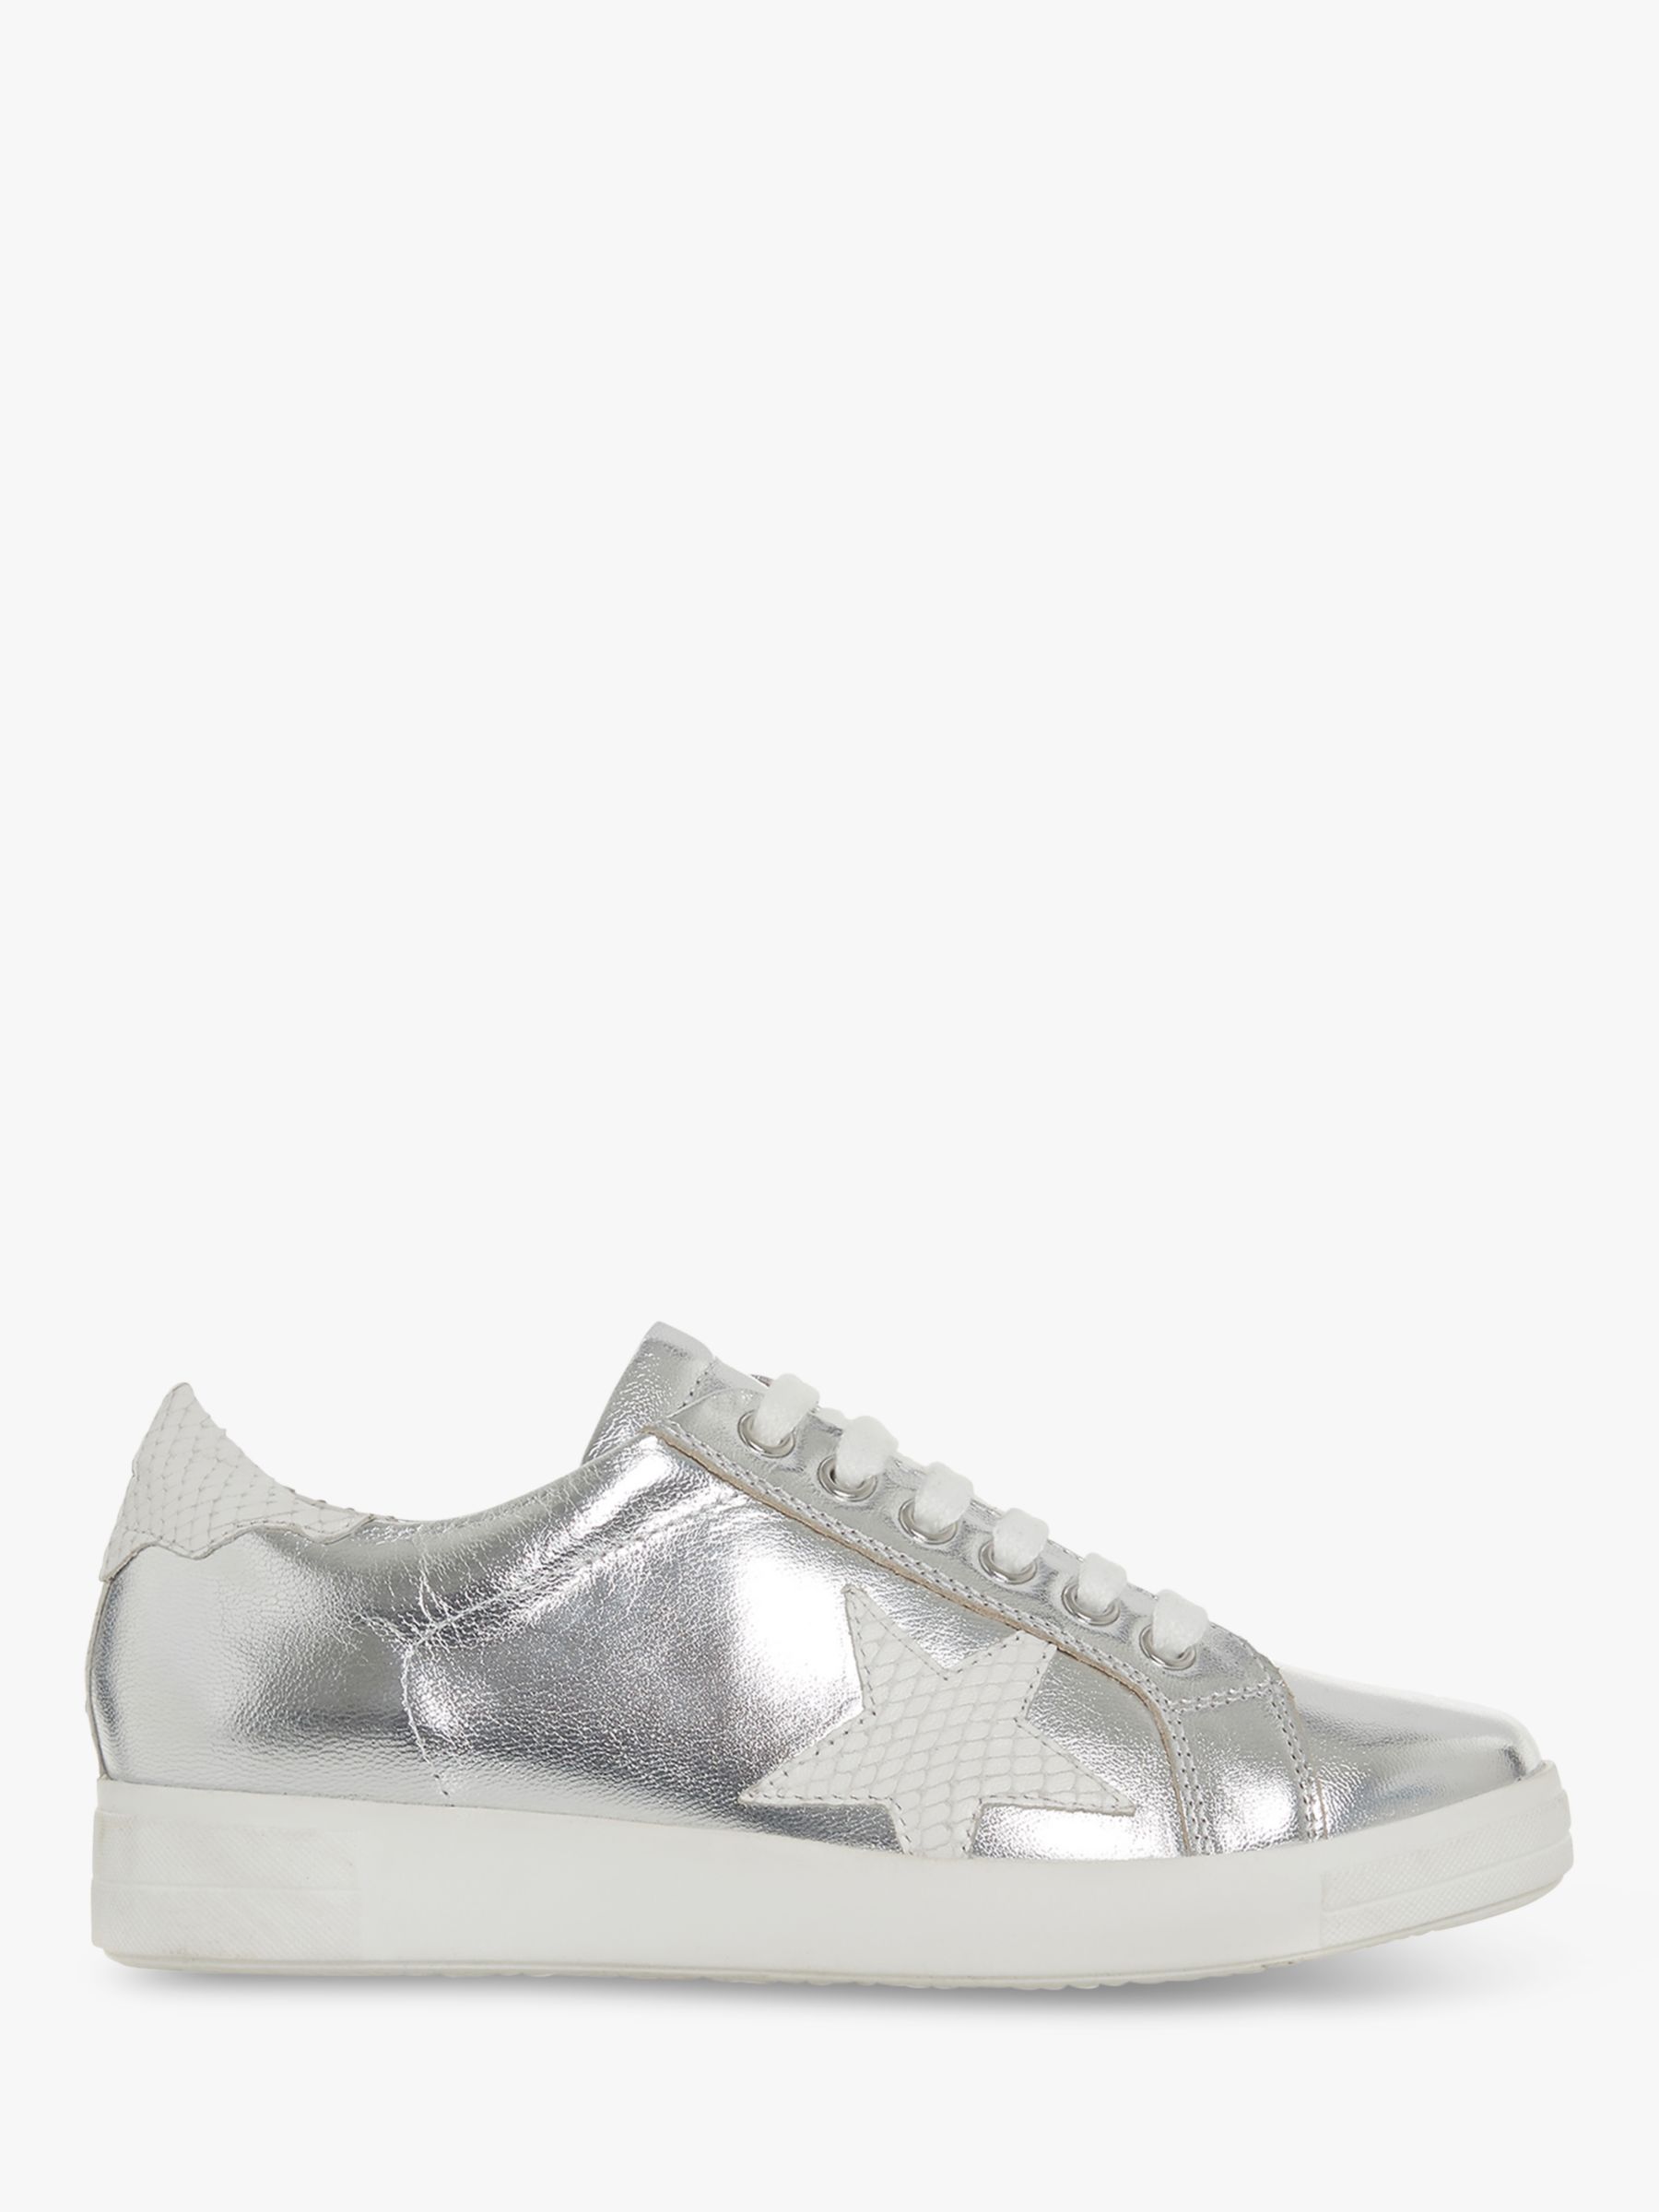 Dune Edris Lace Up Star Trainers, Silver Leather